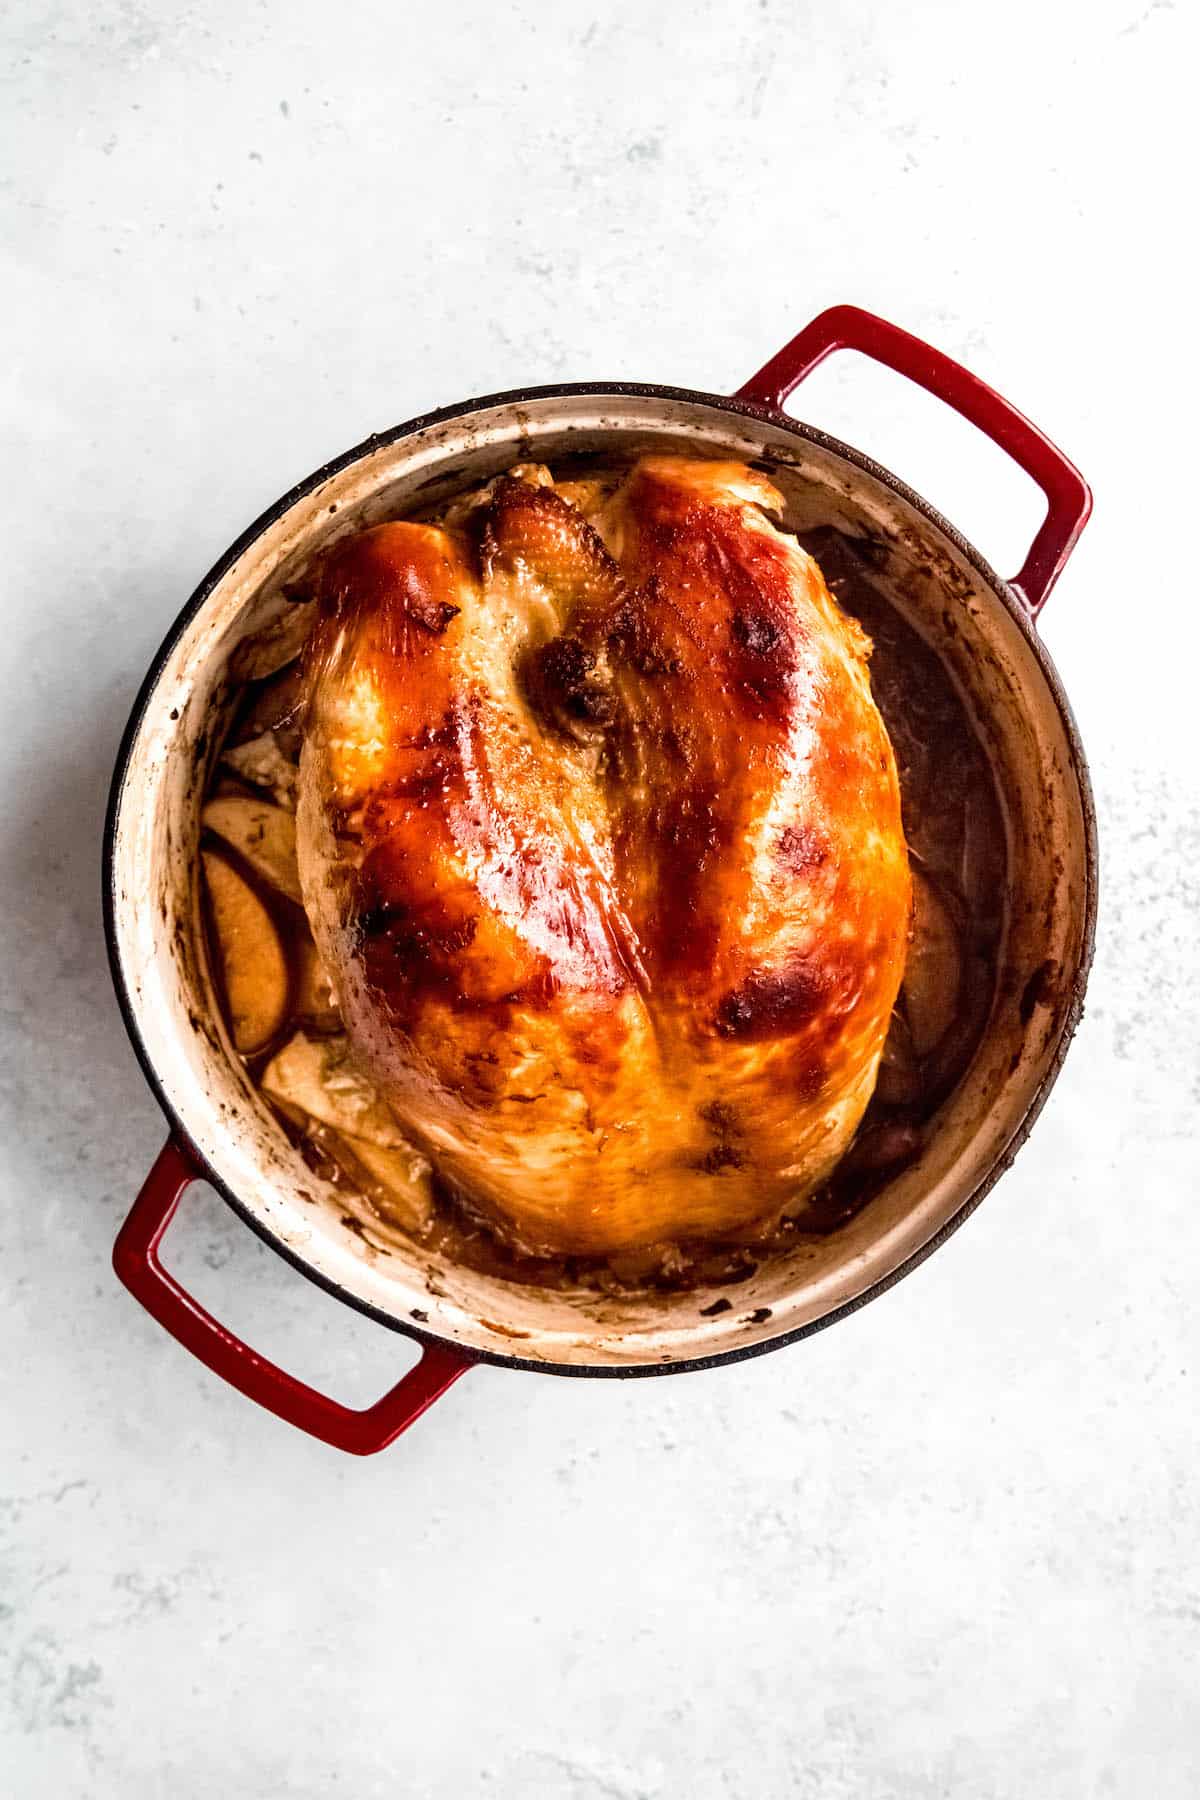 https://confessionsofagroceryaddict.com/wp-content/uploads/2023/11/Dutch-Oven-Turkey-Breast-step-6-breast-is-cooked.jpg